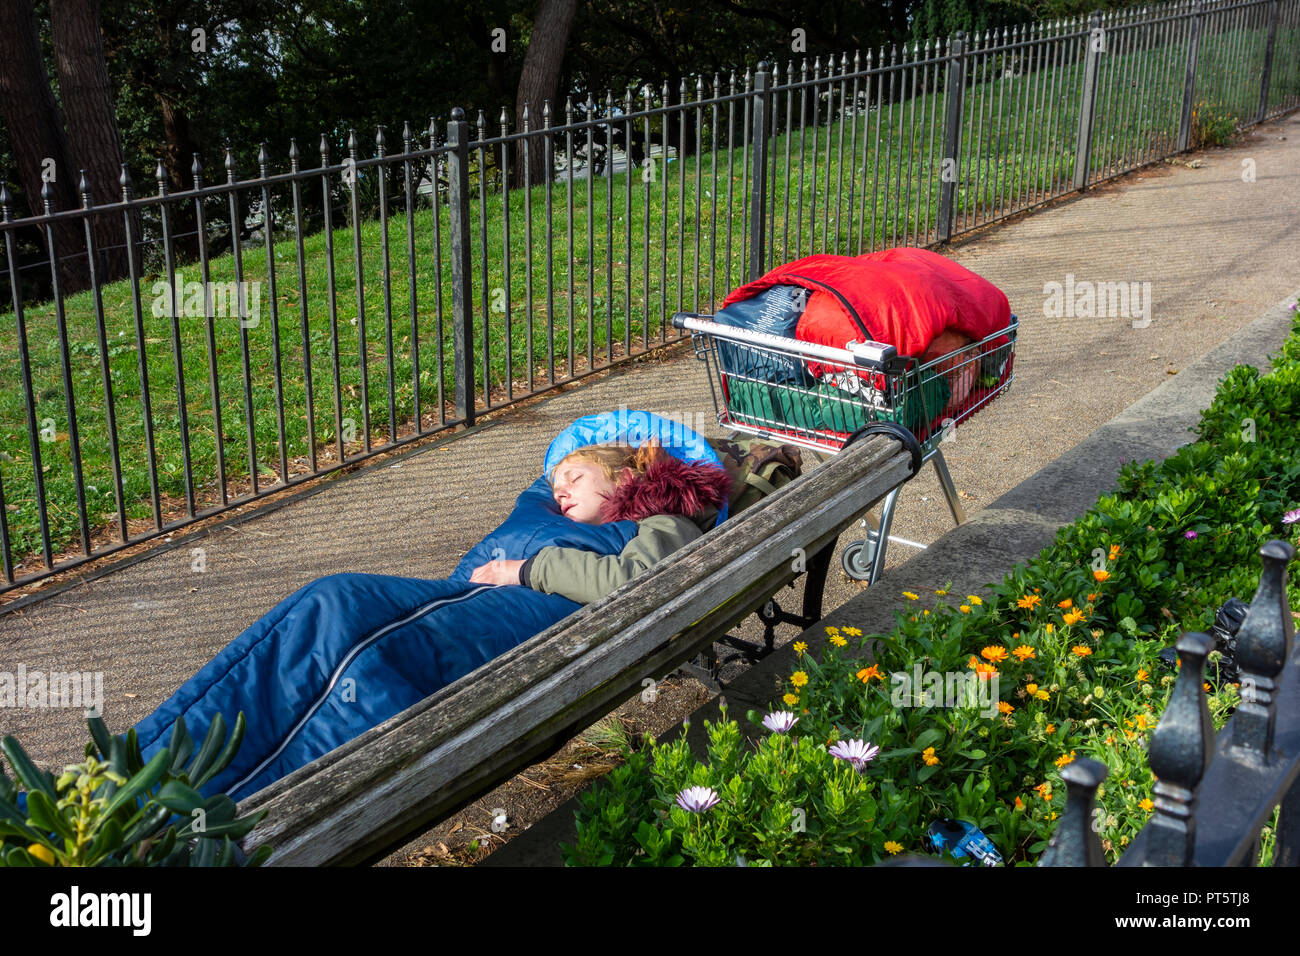 Early morning young homeless woman sleeping rough on a park bench, her only possessions in a shopping trolley. Stock Photo